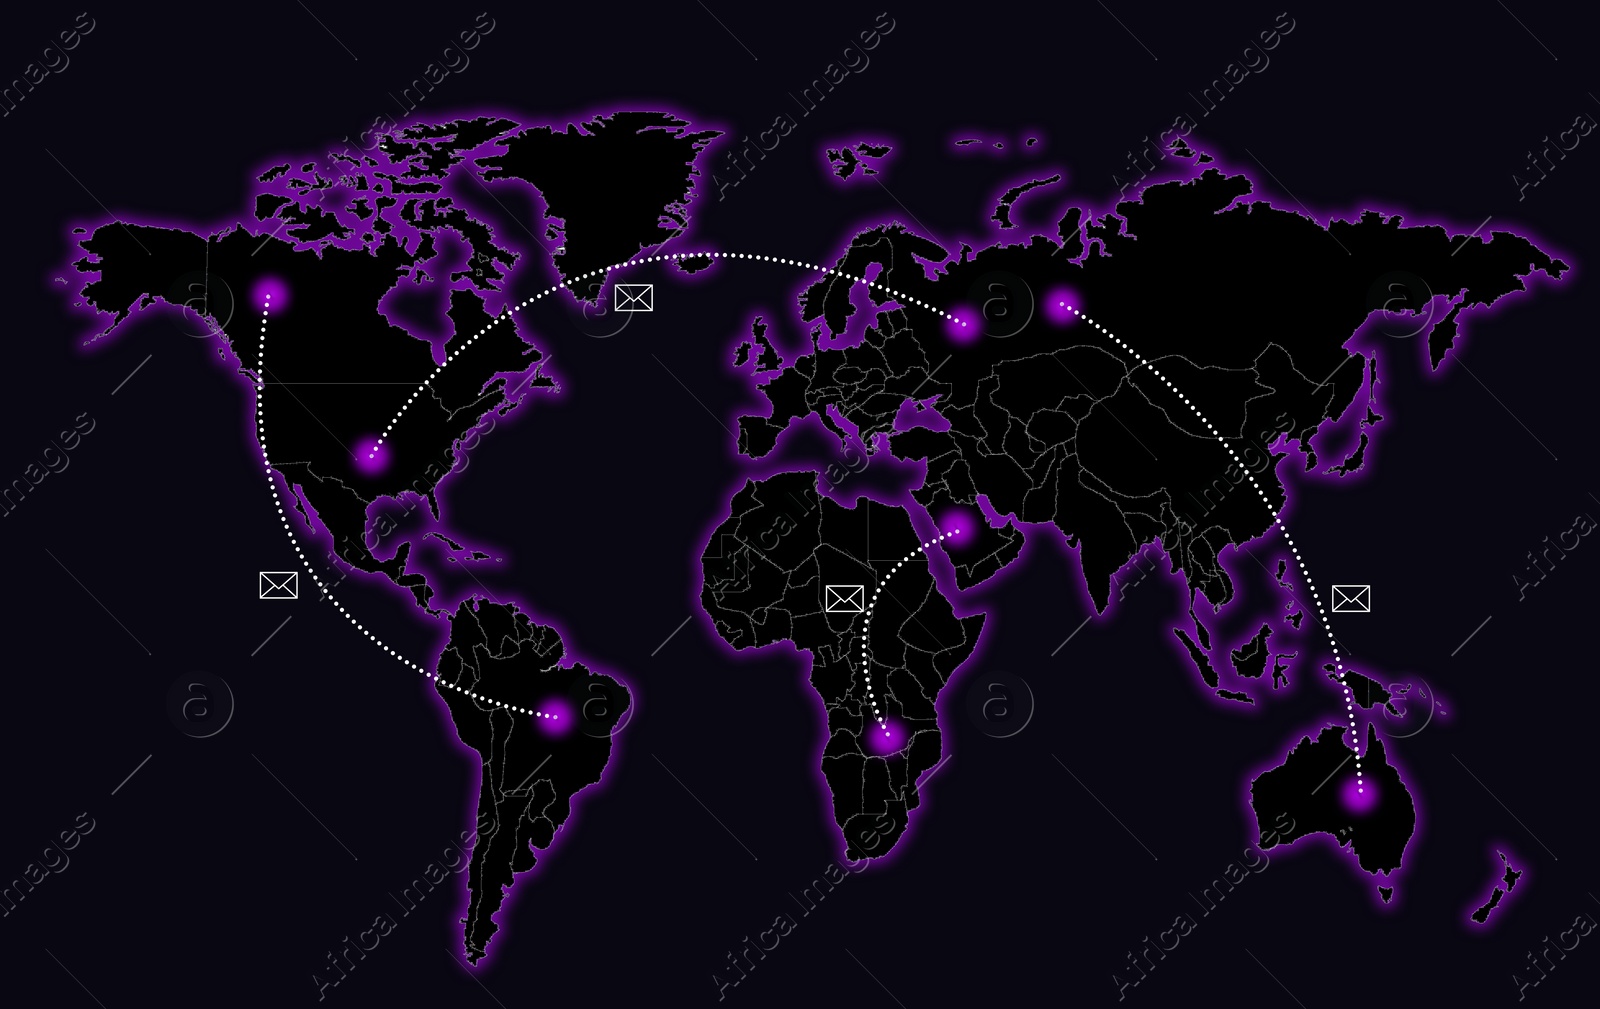 Illustration of Fast internet connection. World map with letter icons and connected spots on black background, illustration